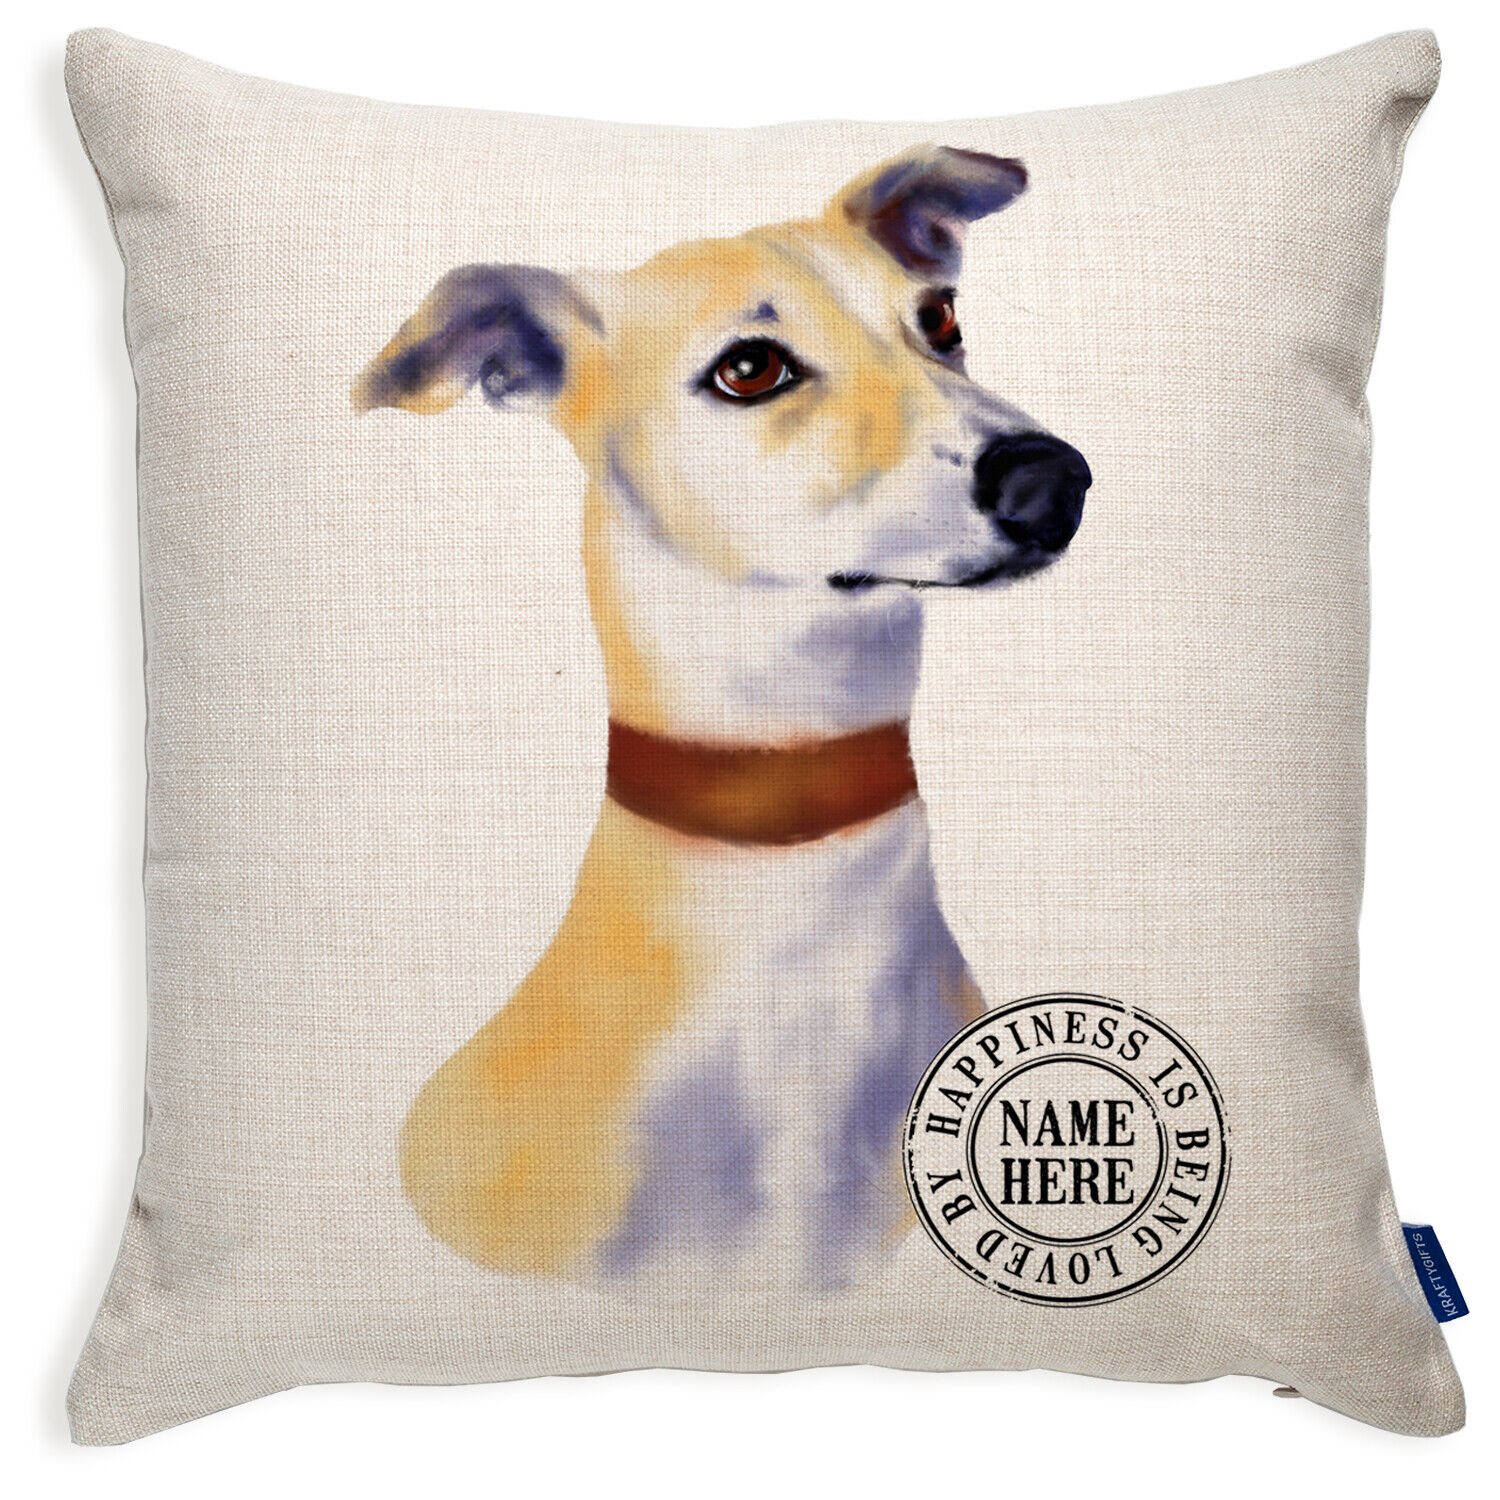 Personalised Greyhound Cushion Cover Portrait Dog Pillow Pup Birthday Gift KDC51